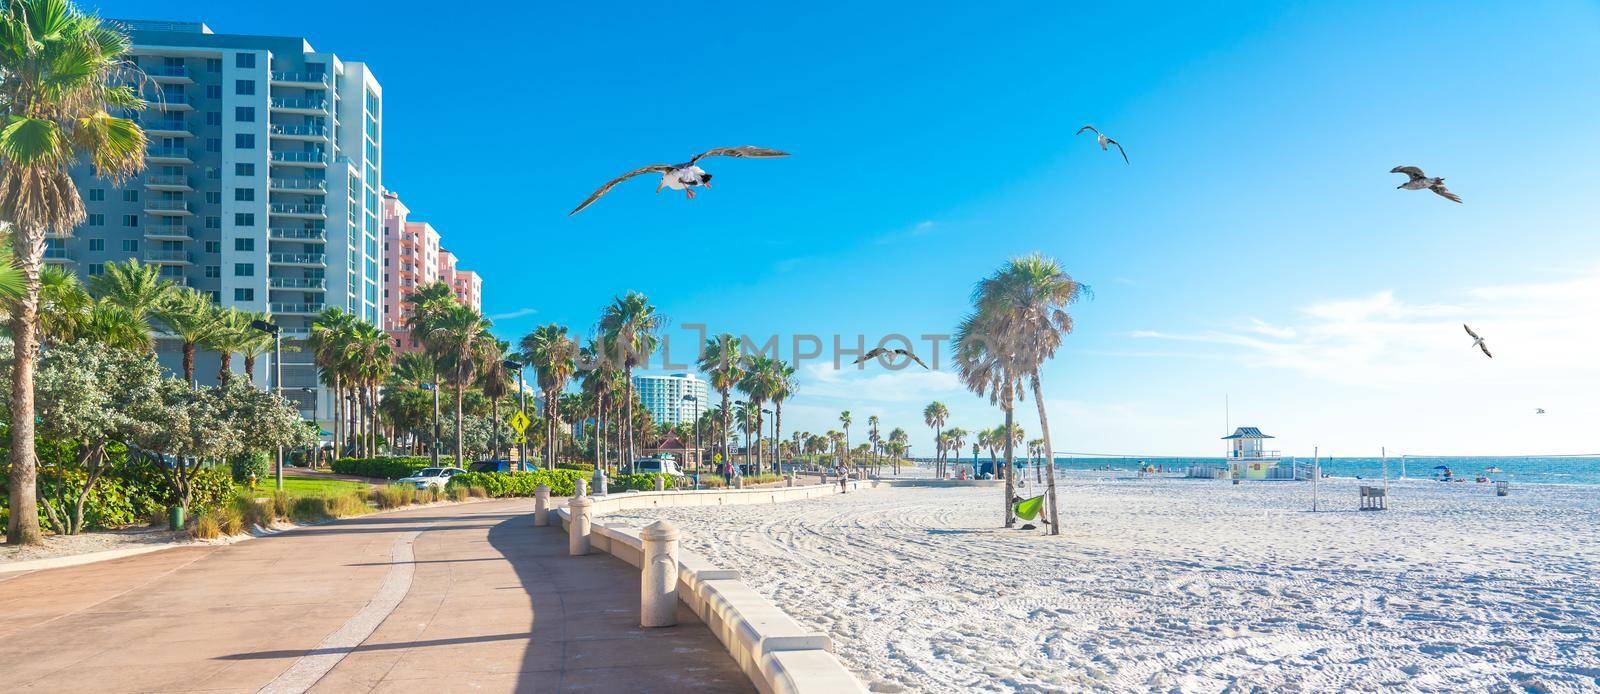 Beautiful Clearwater beach with white sand in Florida USA with seagulls by Mariakray